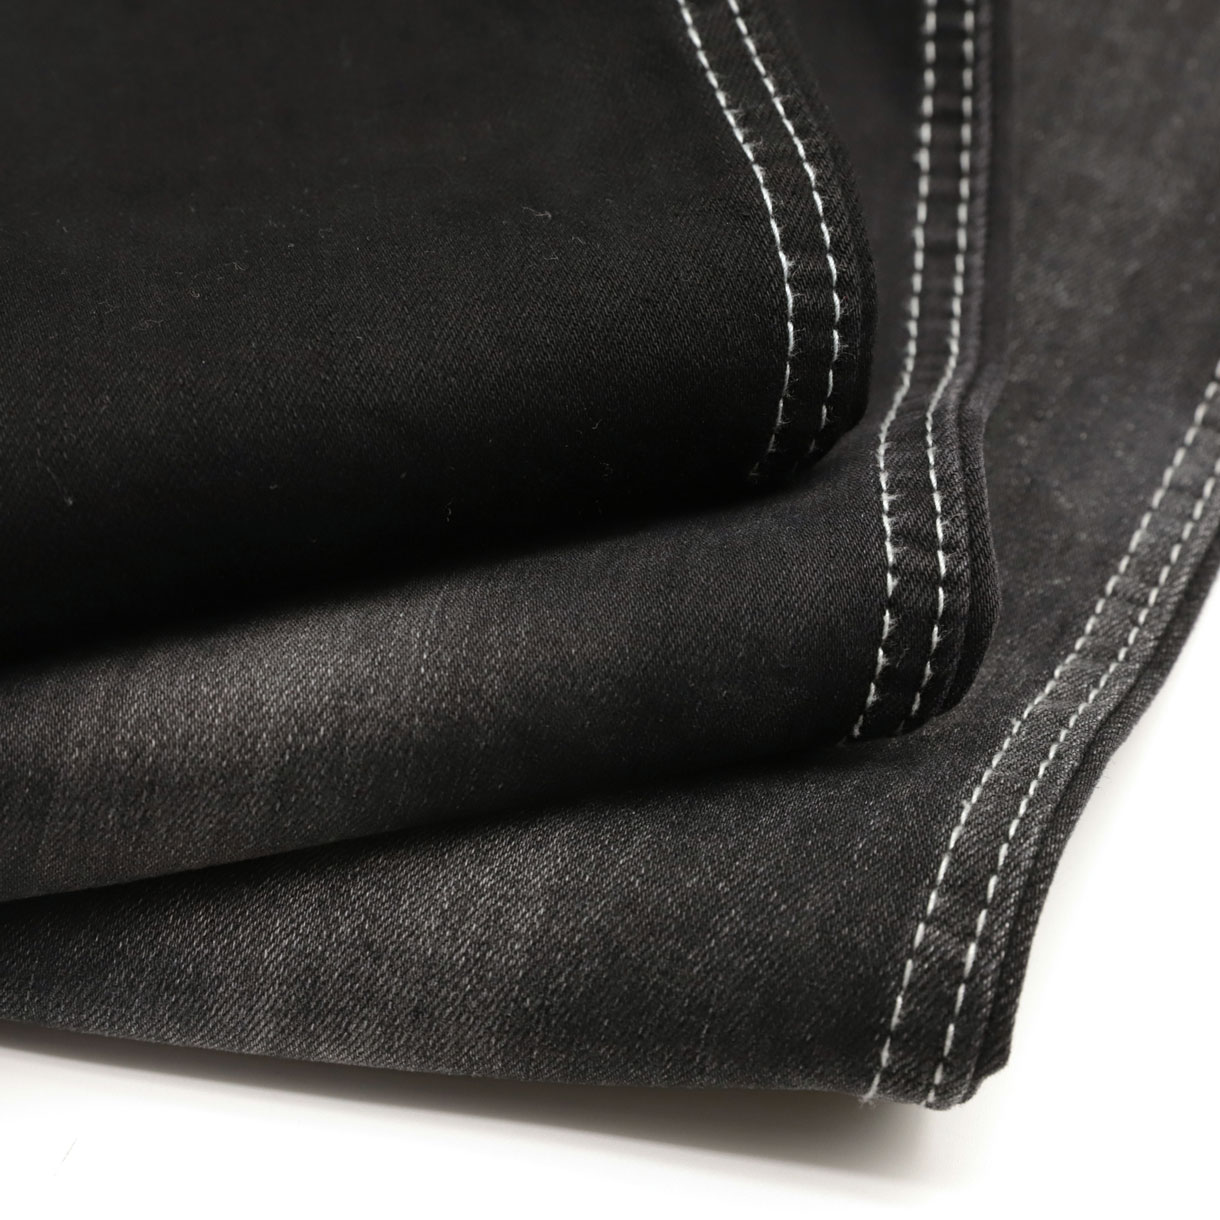 What Are the Advantages and Disadvantages of Denim Material Fabric? 1